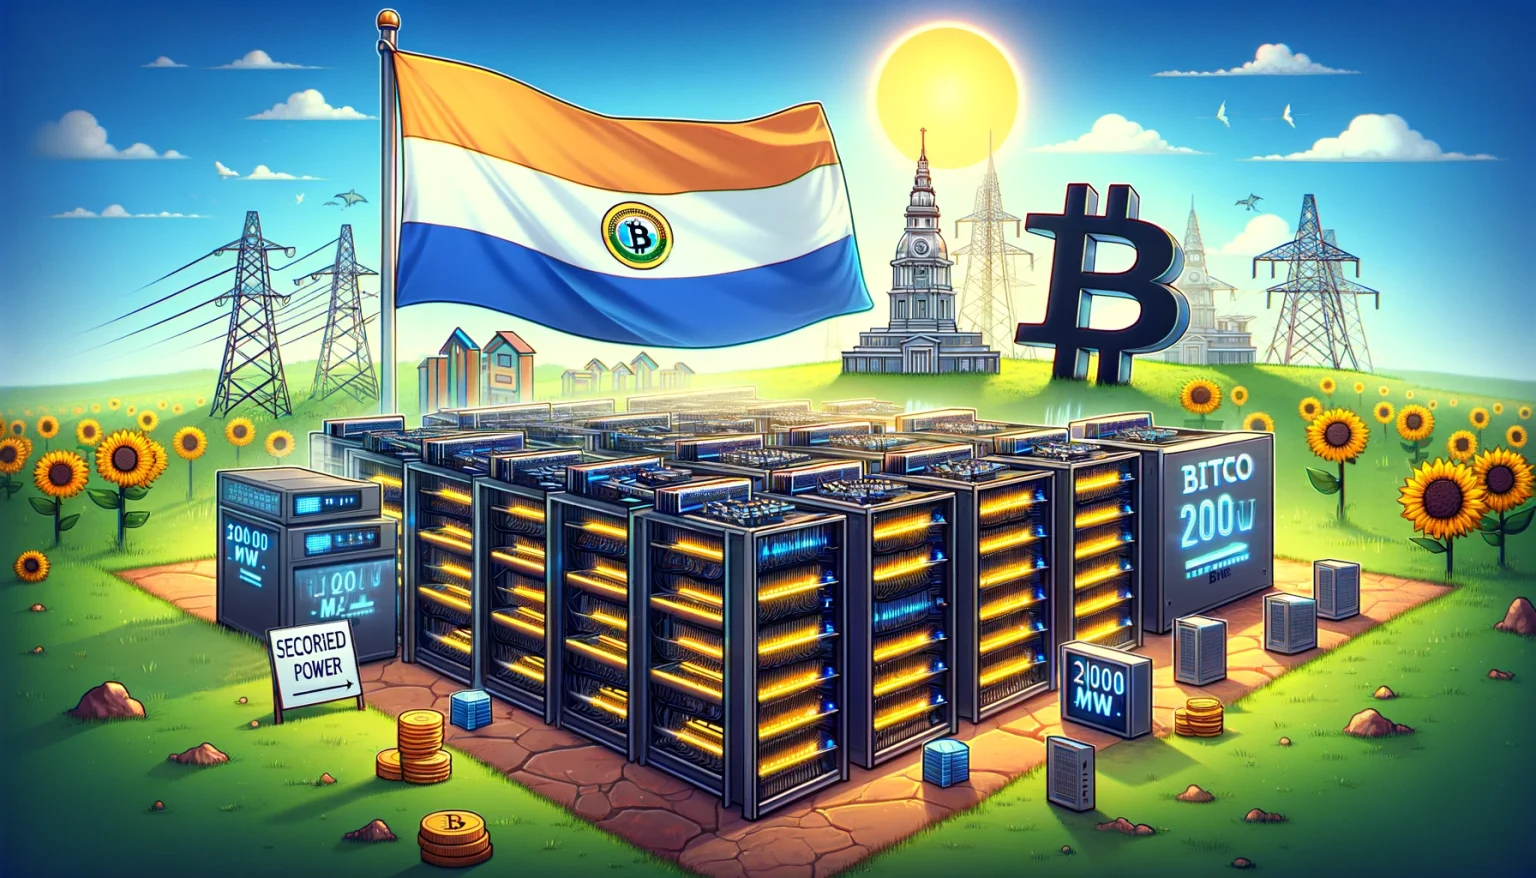 bitfarms-expands-in-paraguay-amid-regulatory-uncertainty-secures-200-mw-for-bitcoin-mining